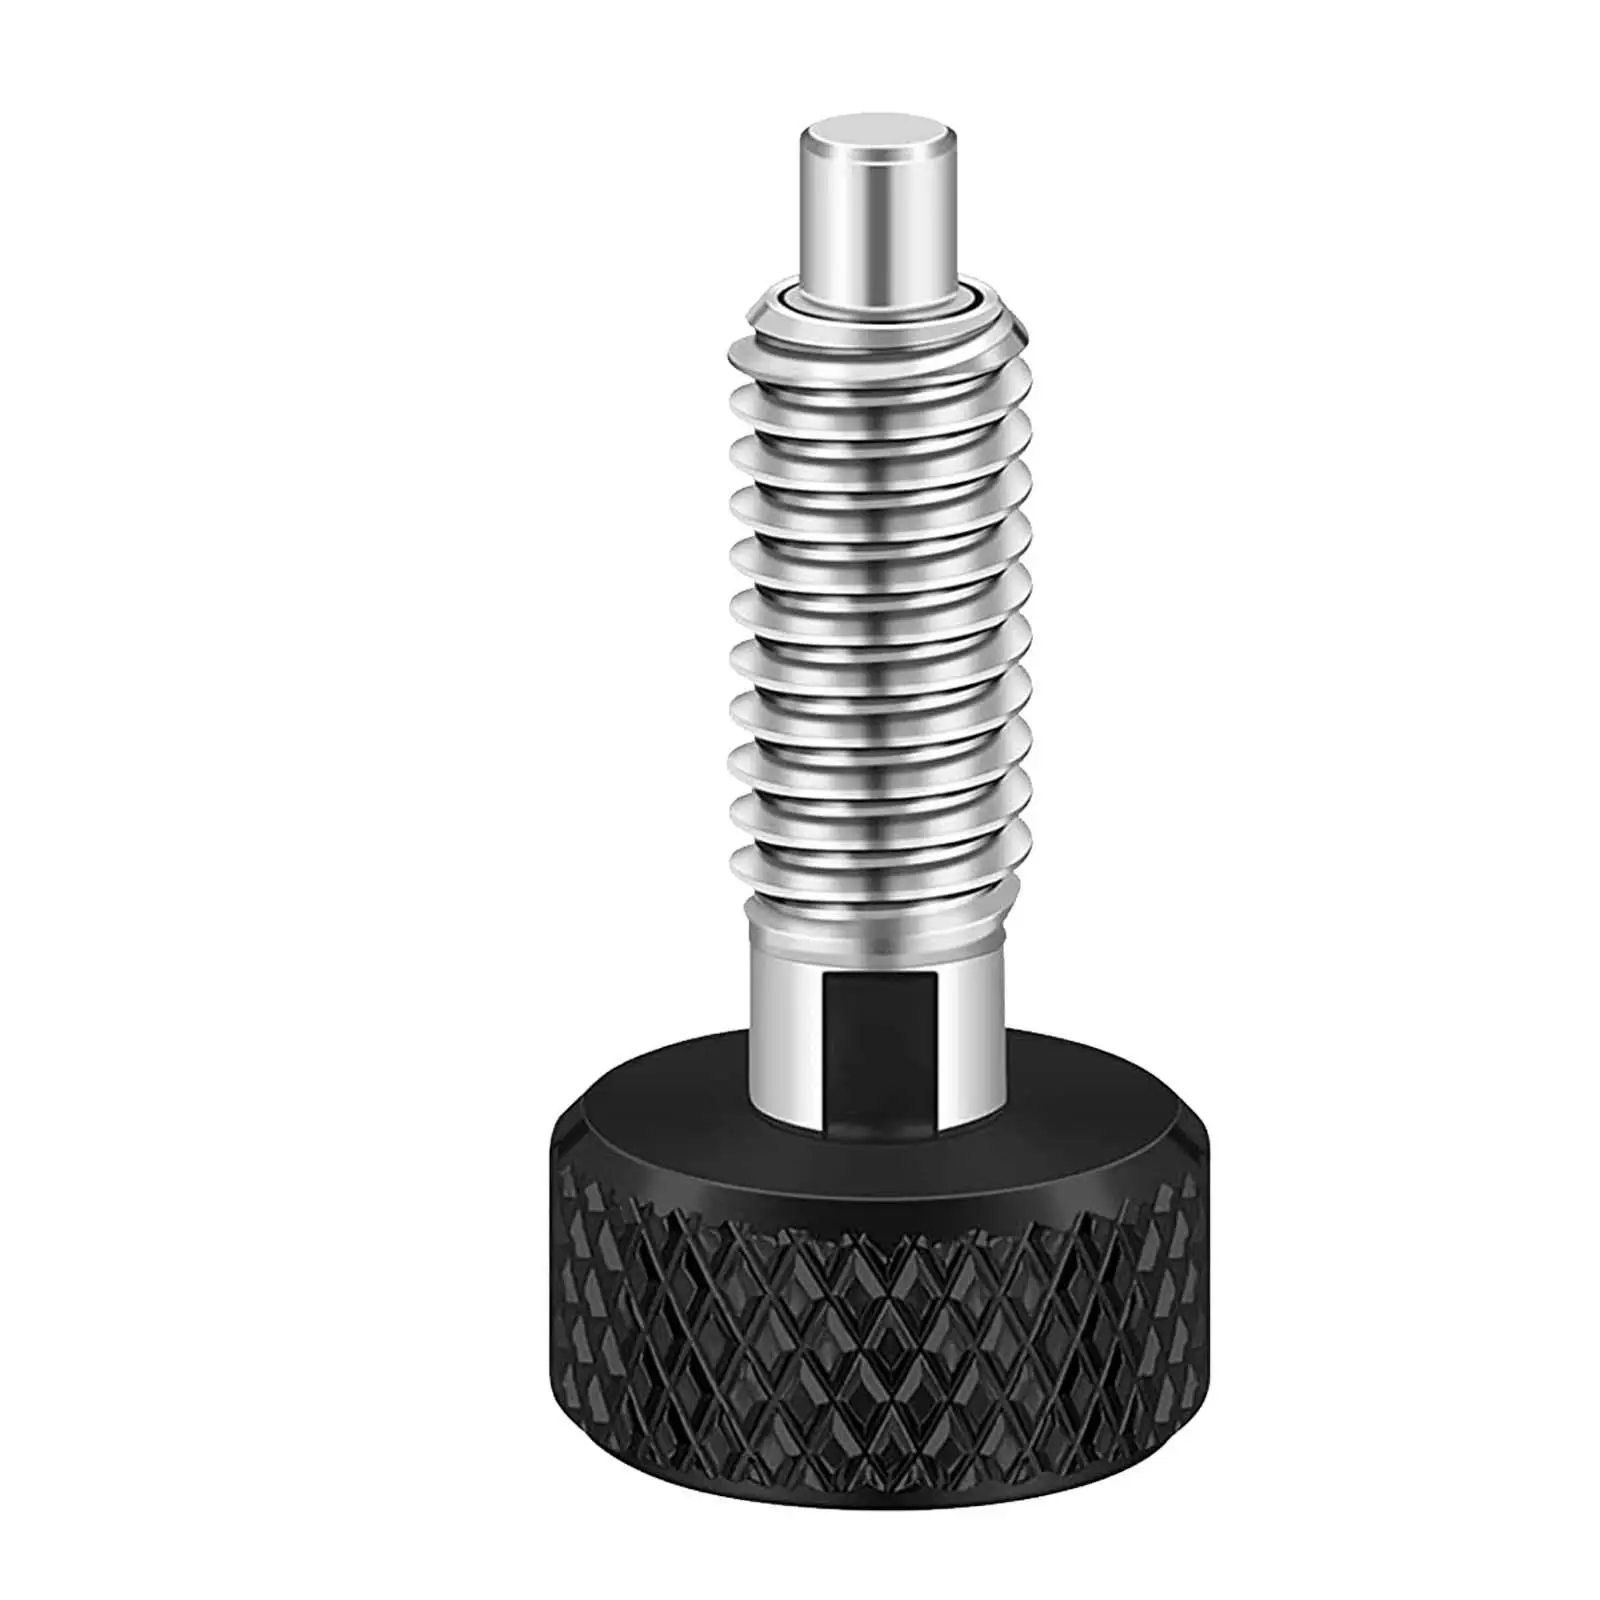 Hand Retractable Spring Plunger with Knurled Handle Knurled Head Knob Plunger for Electrical Appliances Industrial Equipment